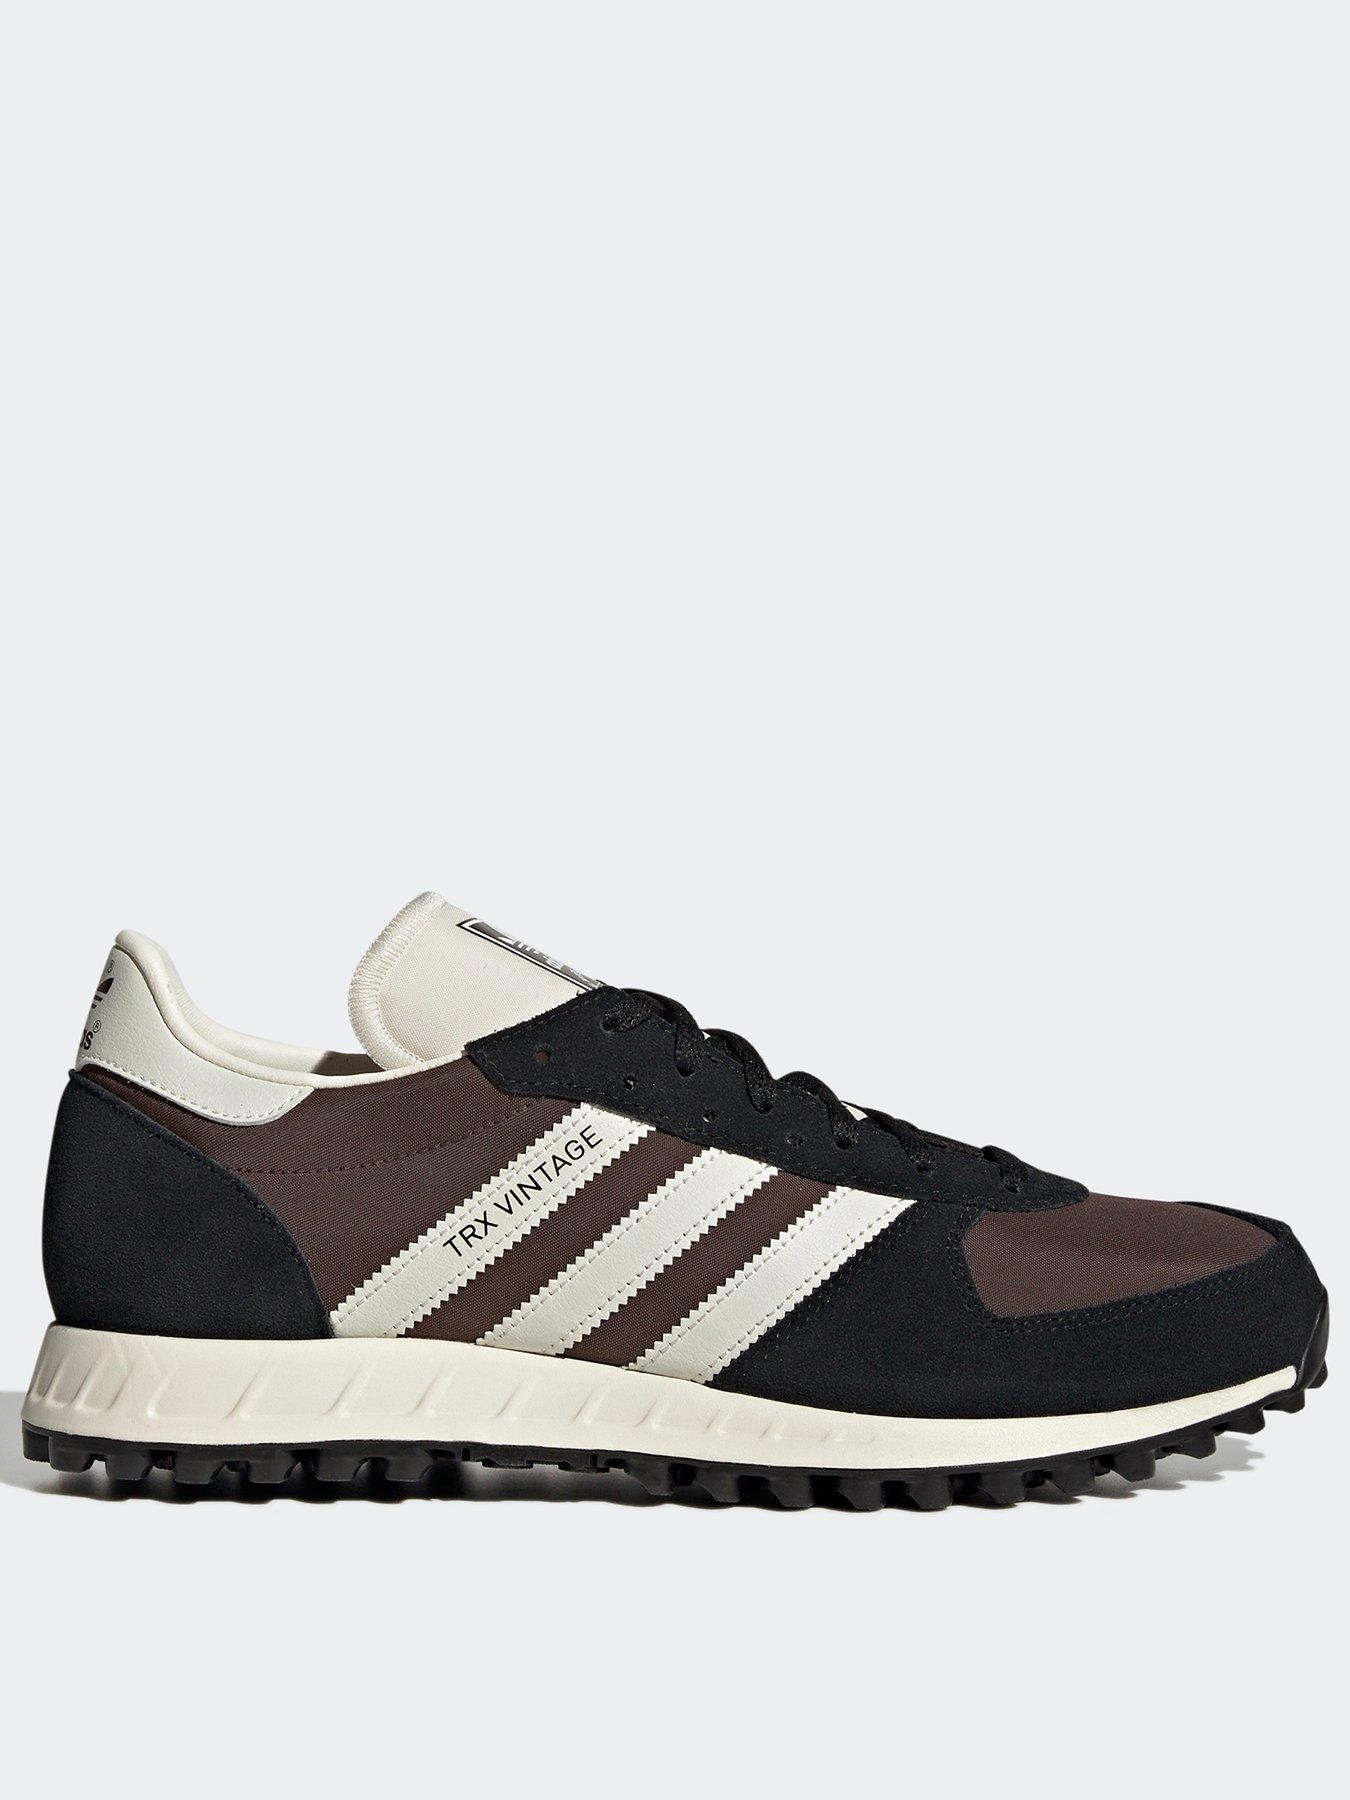 adidas Trainers | Men's adidas Trainers | Very.co.uk